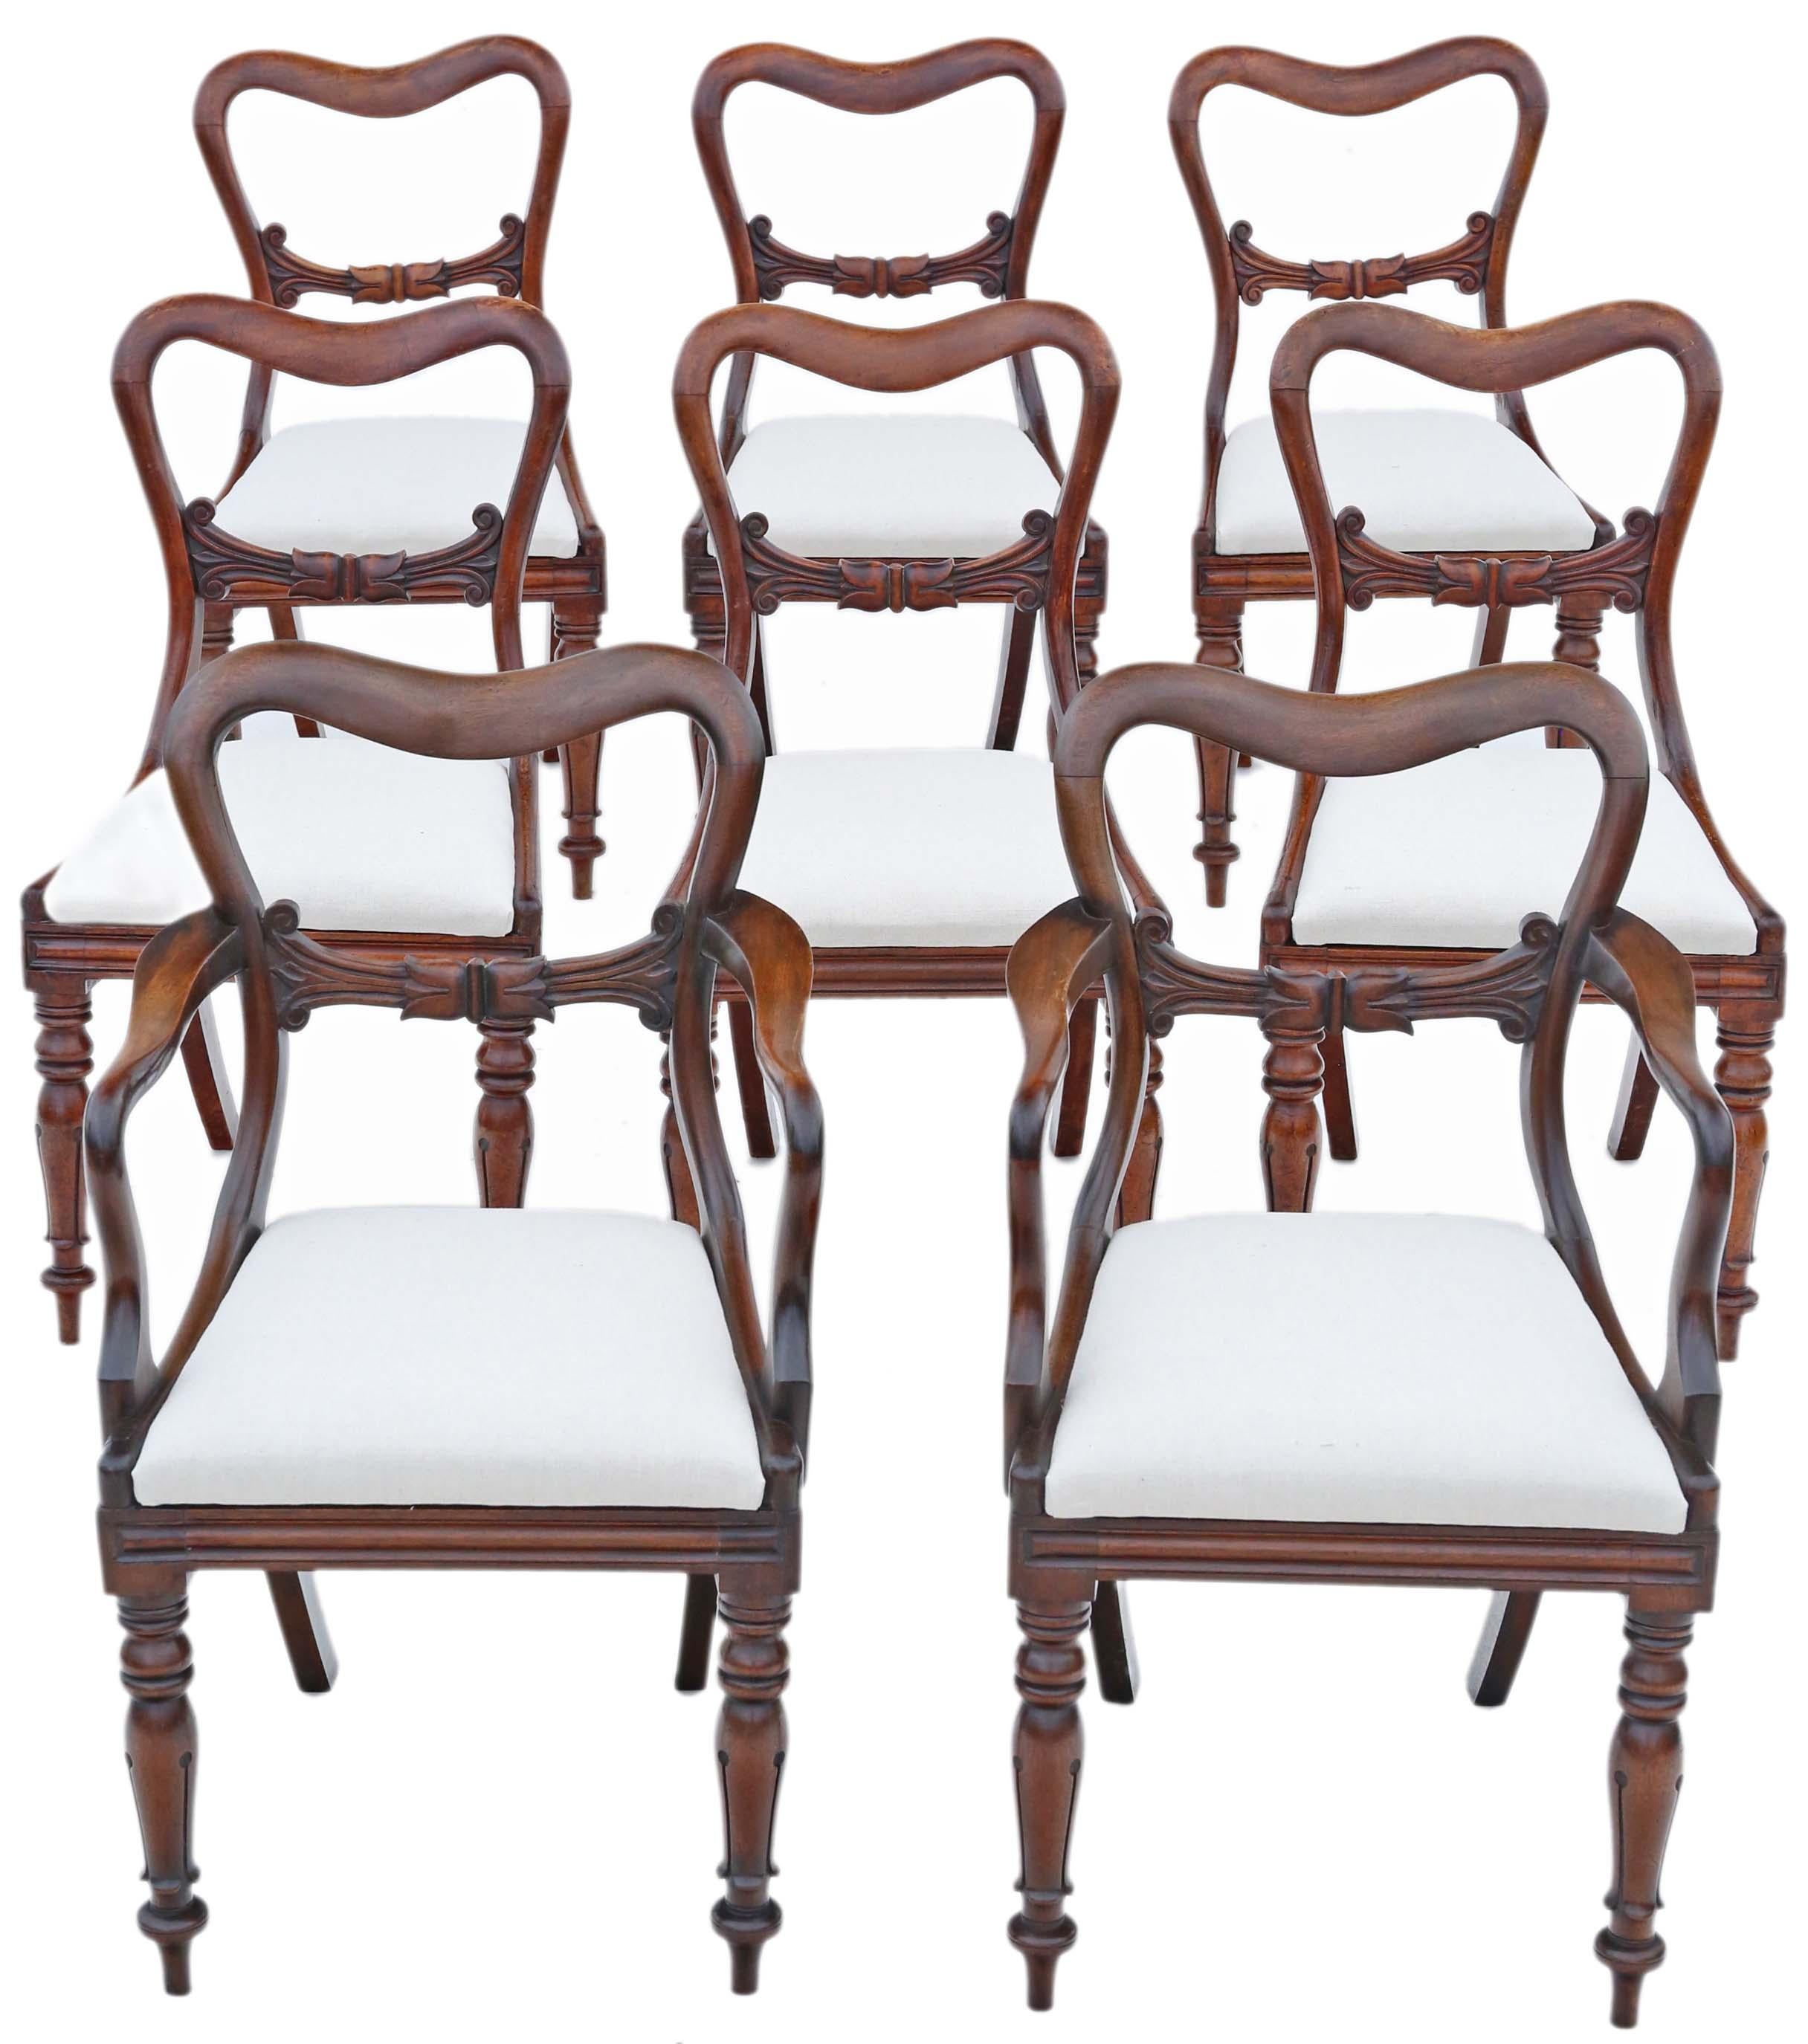 Antique fine quality set of 8 (6 plus 2) Victorian mahogany balloon back dining chairs C1840.

No loose joints or woodworm. Lovely age, colour and original patina.

New professional upholstery.

Overall maximum dimensions:

Carver 51cm W x